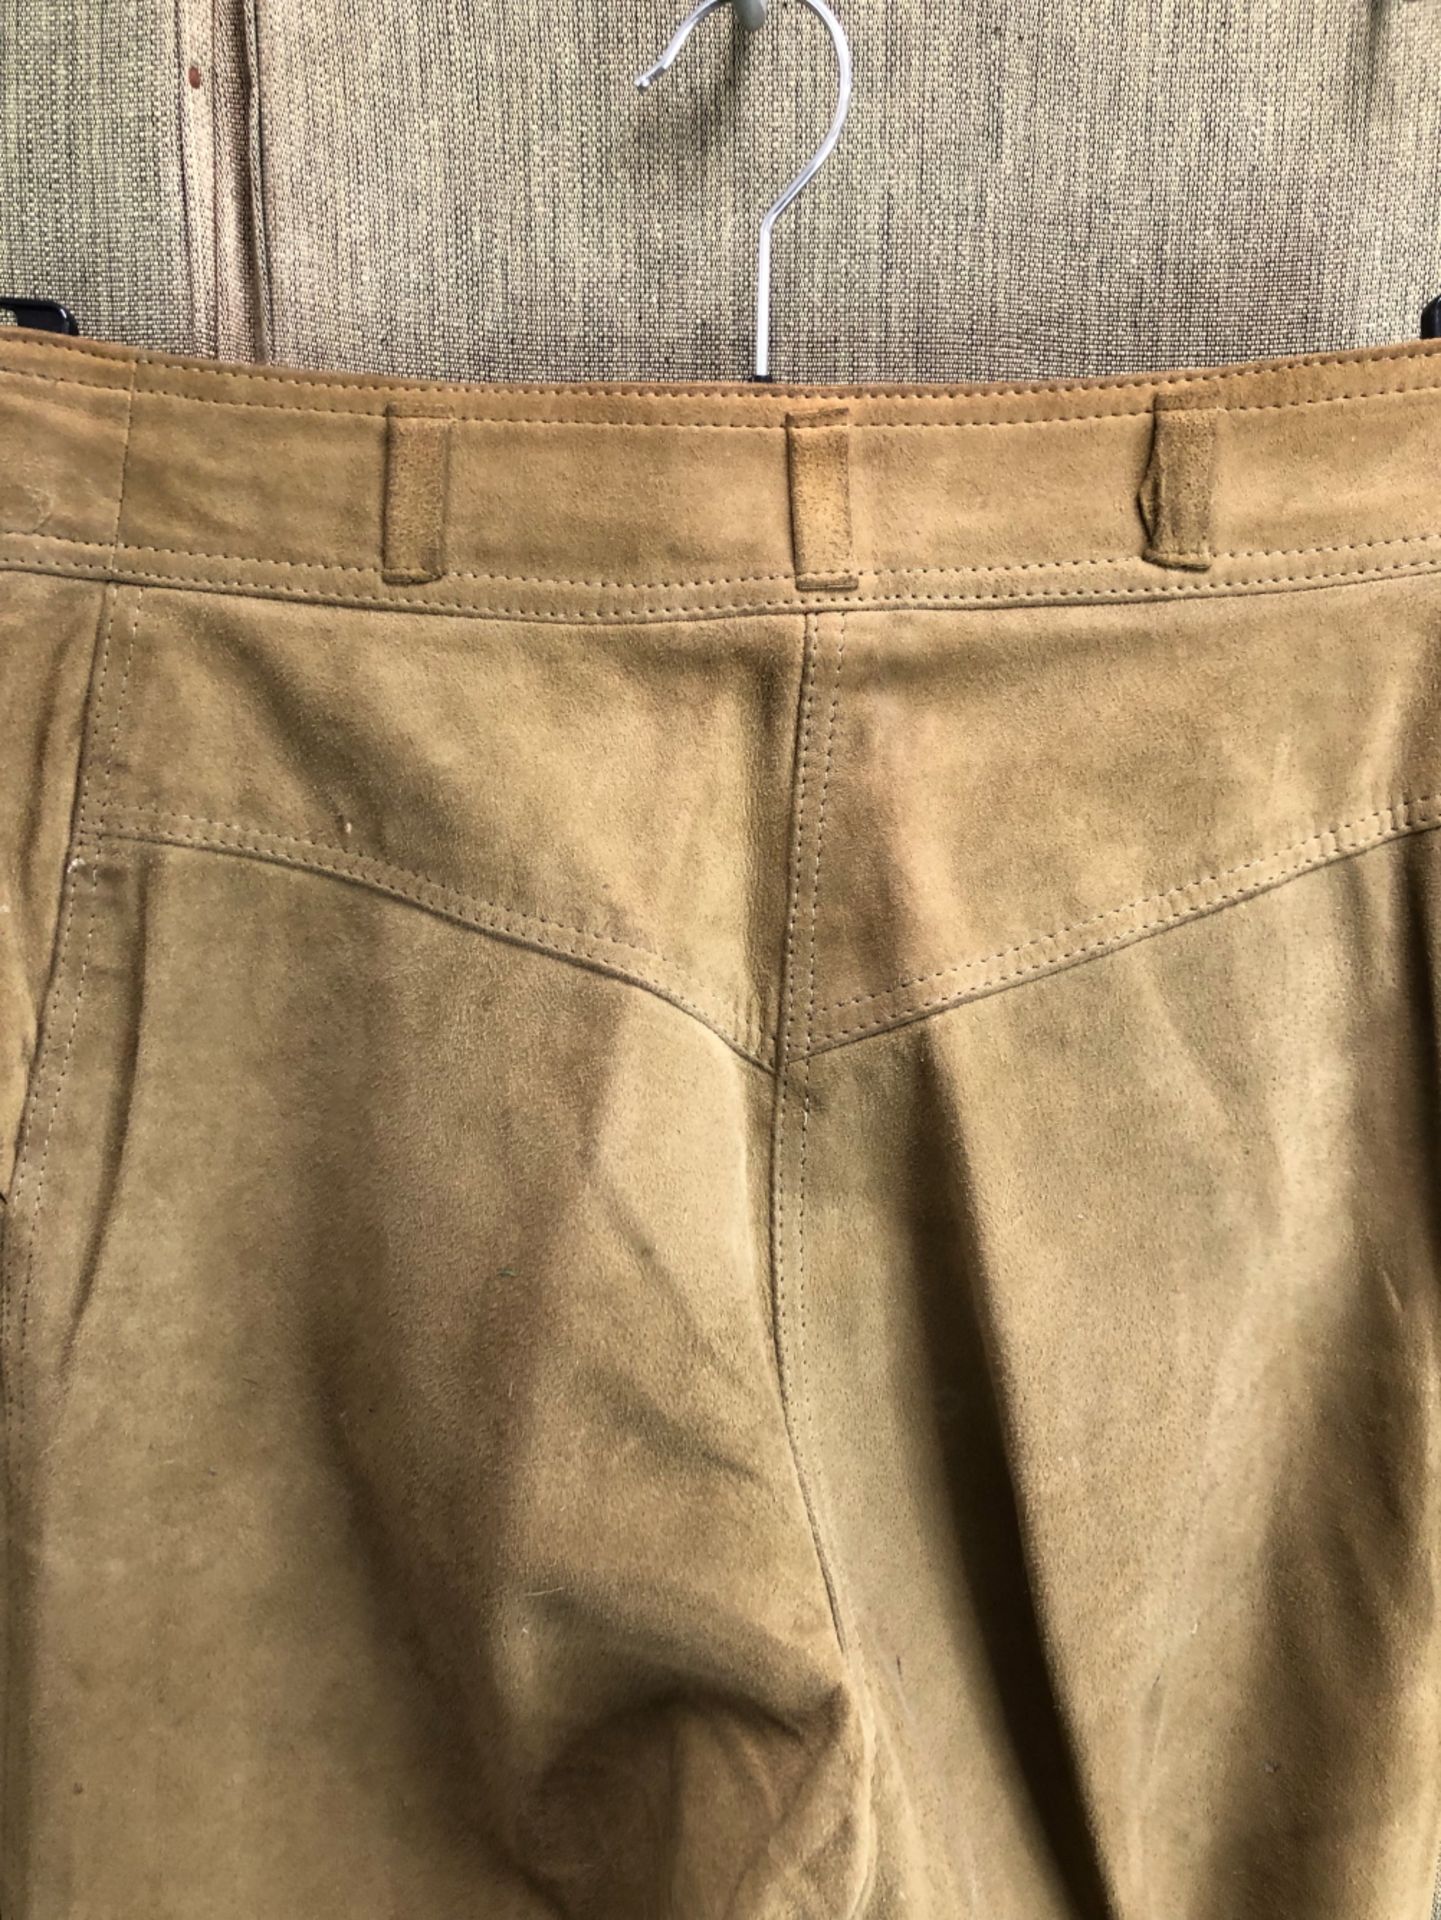 TWO PAIRS OF PATTI SEARLE PALE GREEN FLARED SUEDE TROUSERS ONE 38 INCH HE OTHER 34 INCH, TOGETHER - Image 16 of 26